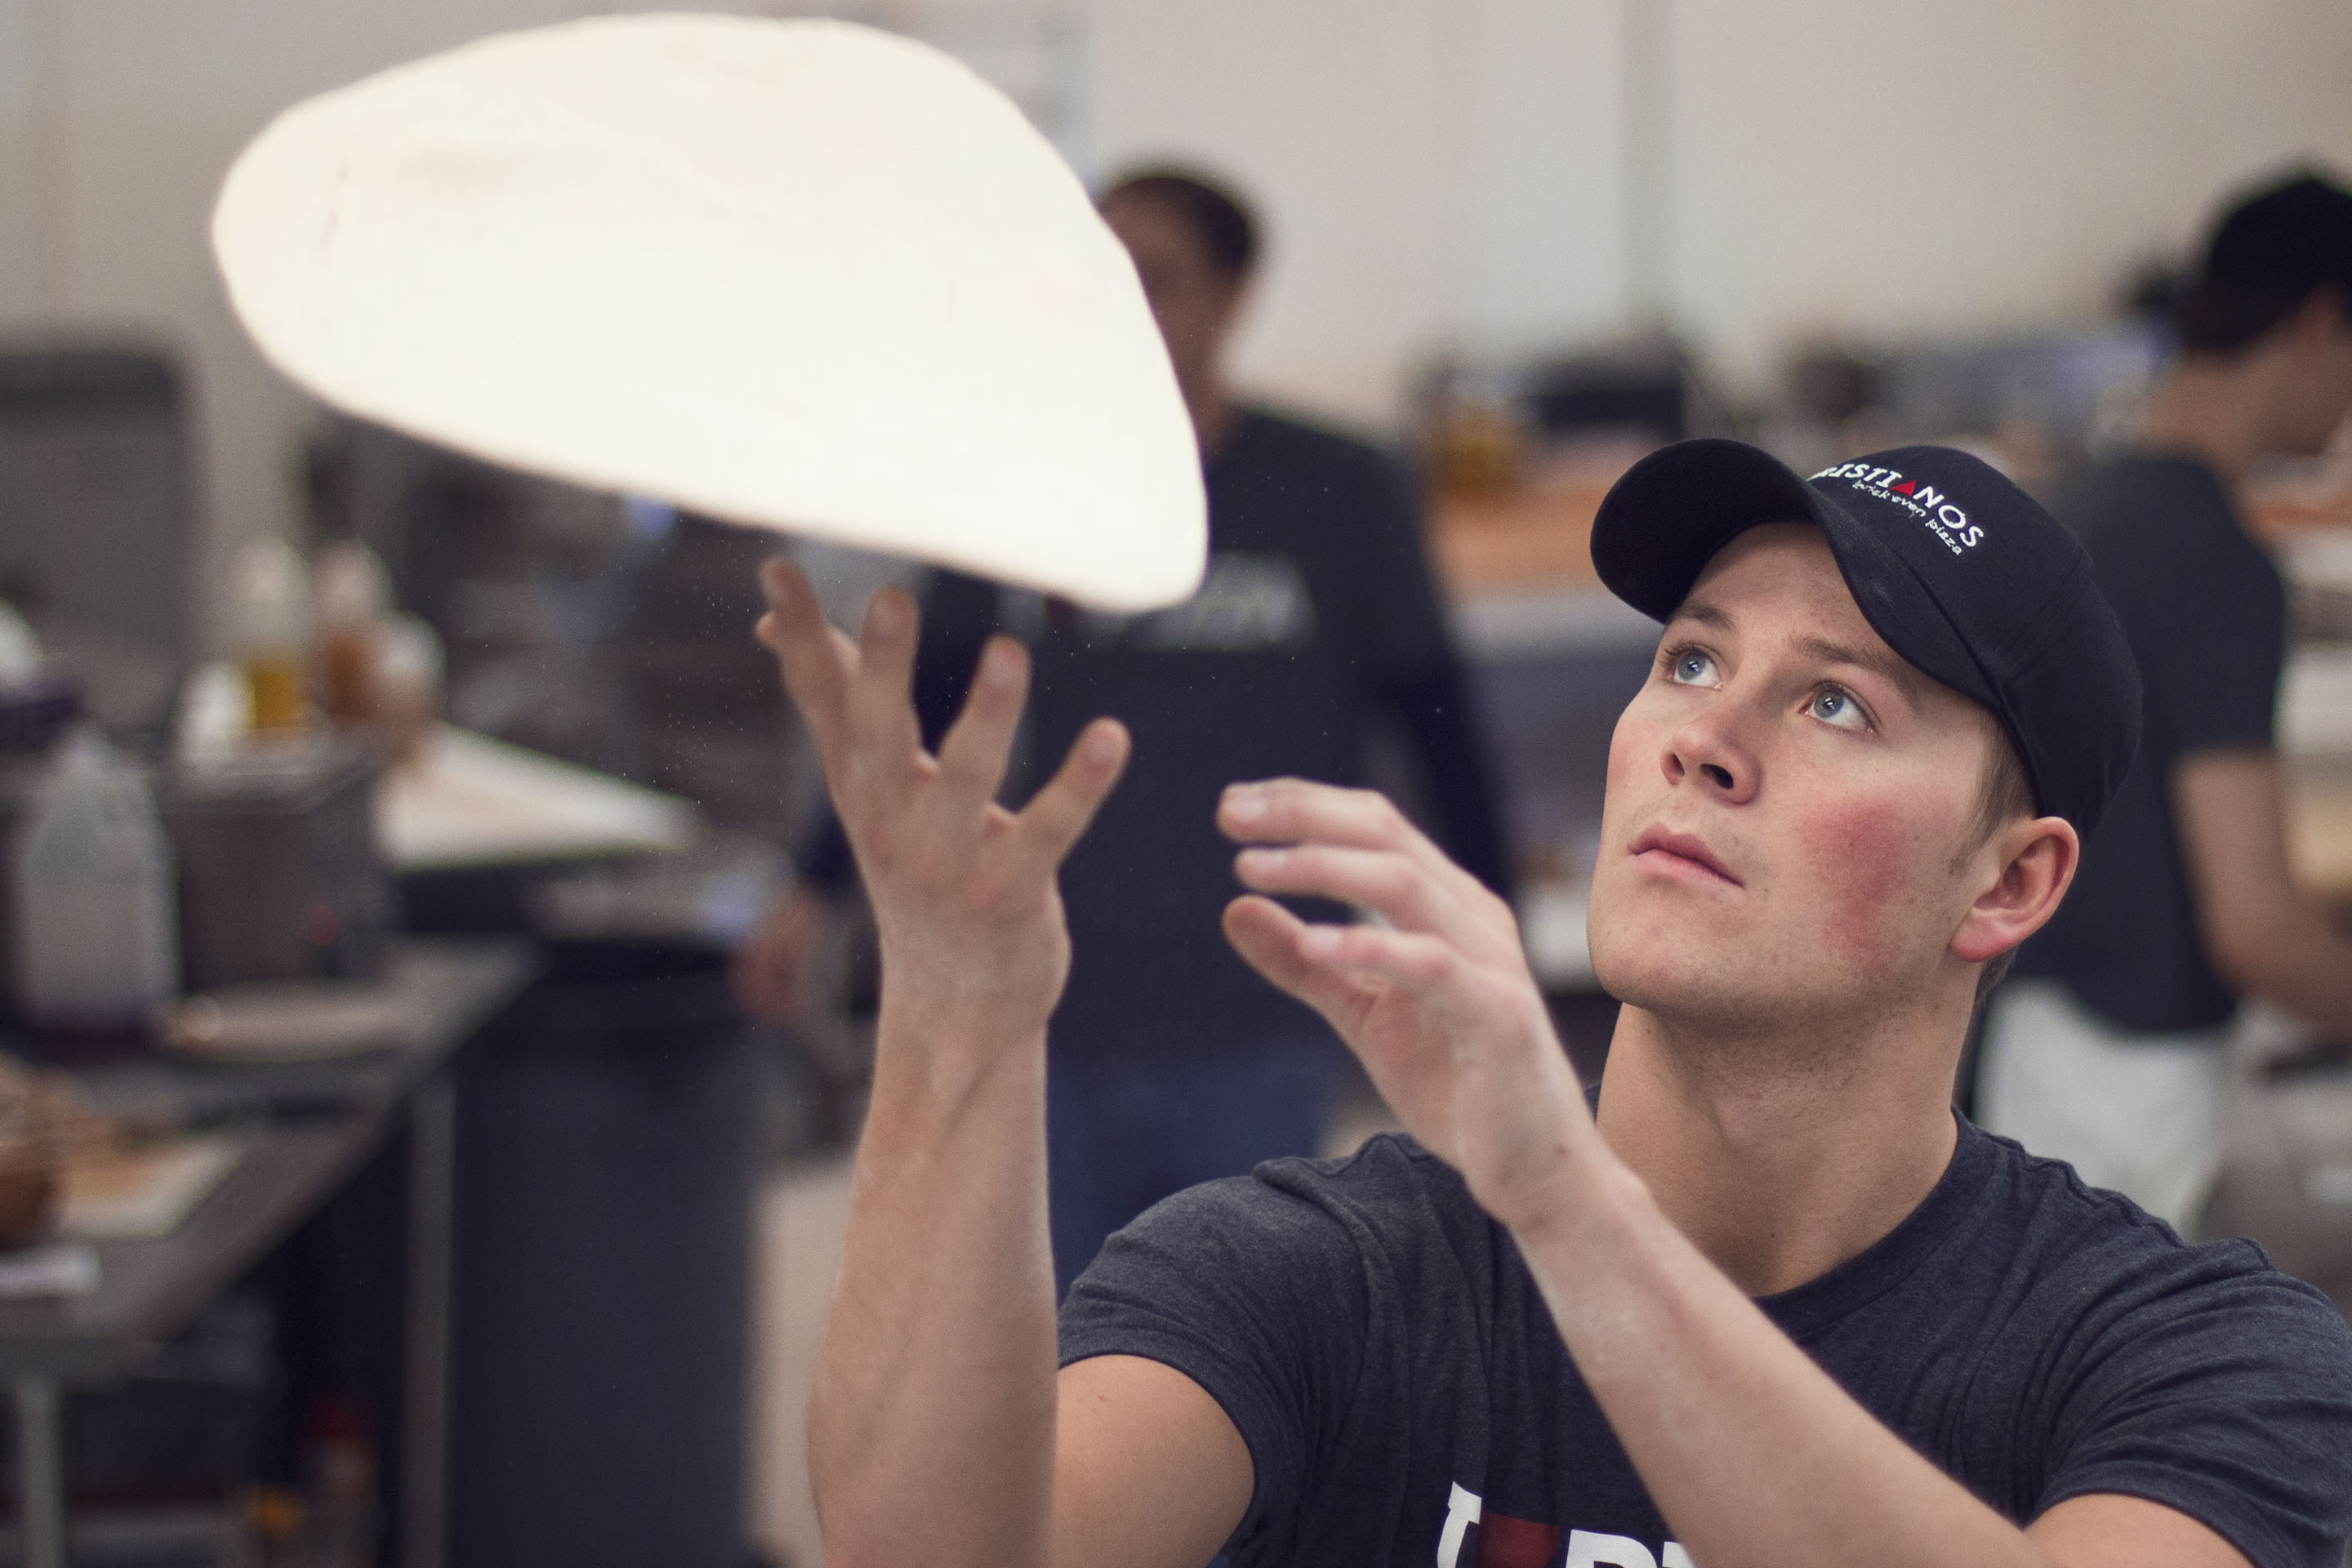 Sean Wise, son of owner Larry Wise, tosses pizza dough in Christianos kitchen